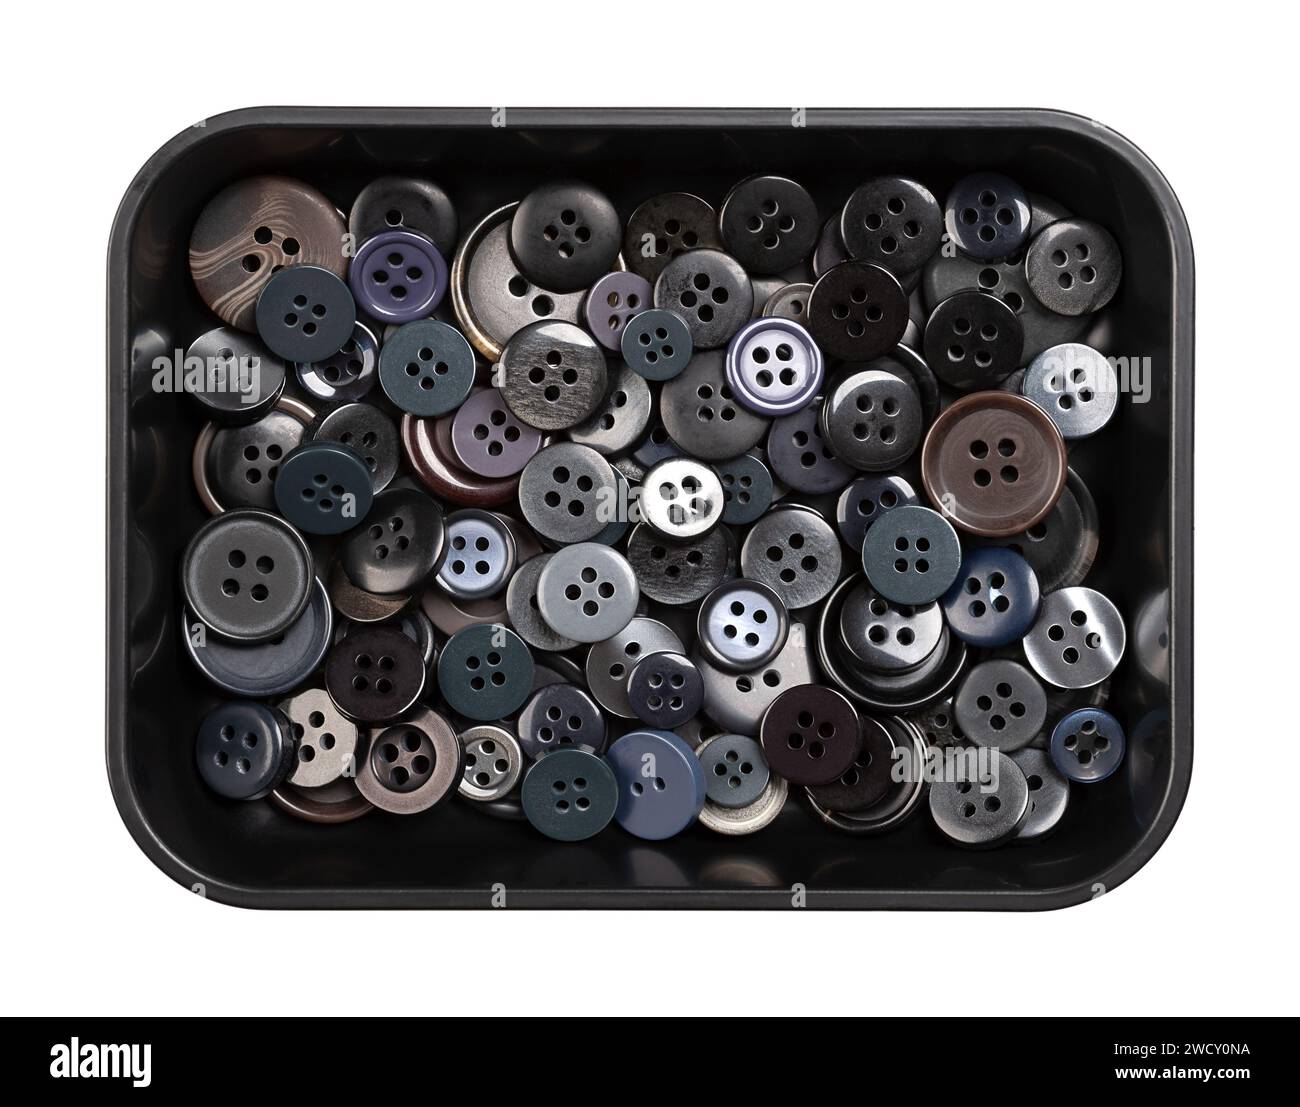 Plastic sew-through buttons, in a black plastic dish. Flat buttons with holes through which thread is sewn to attach the button. Fastener. Stock Photo